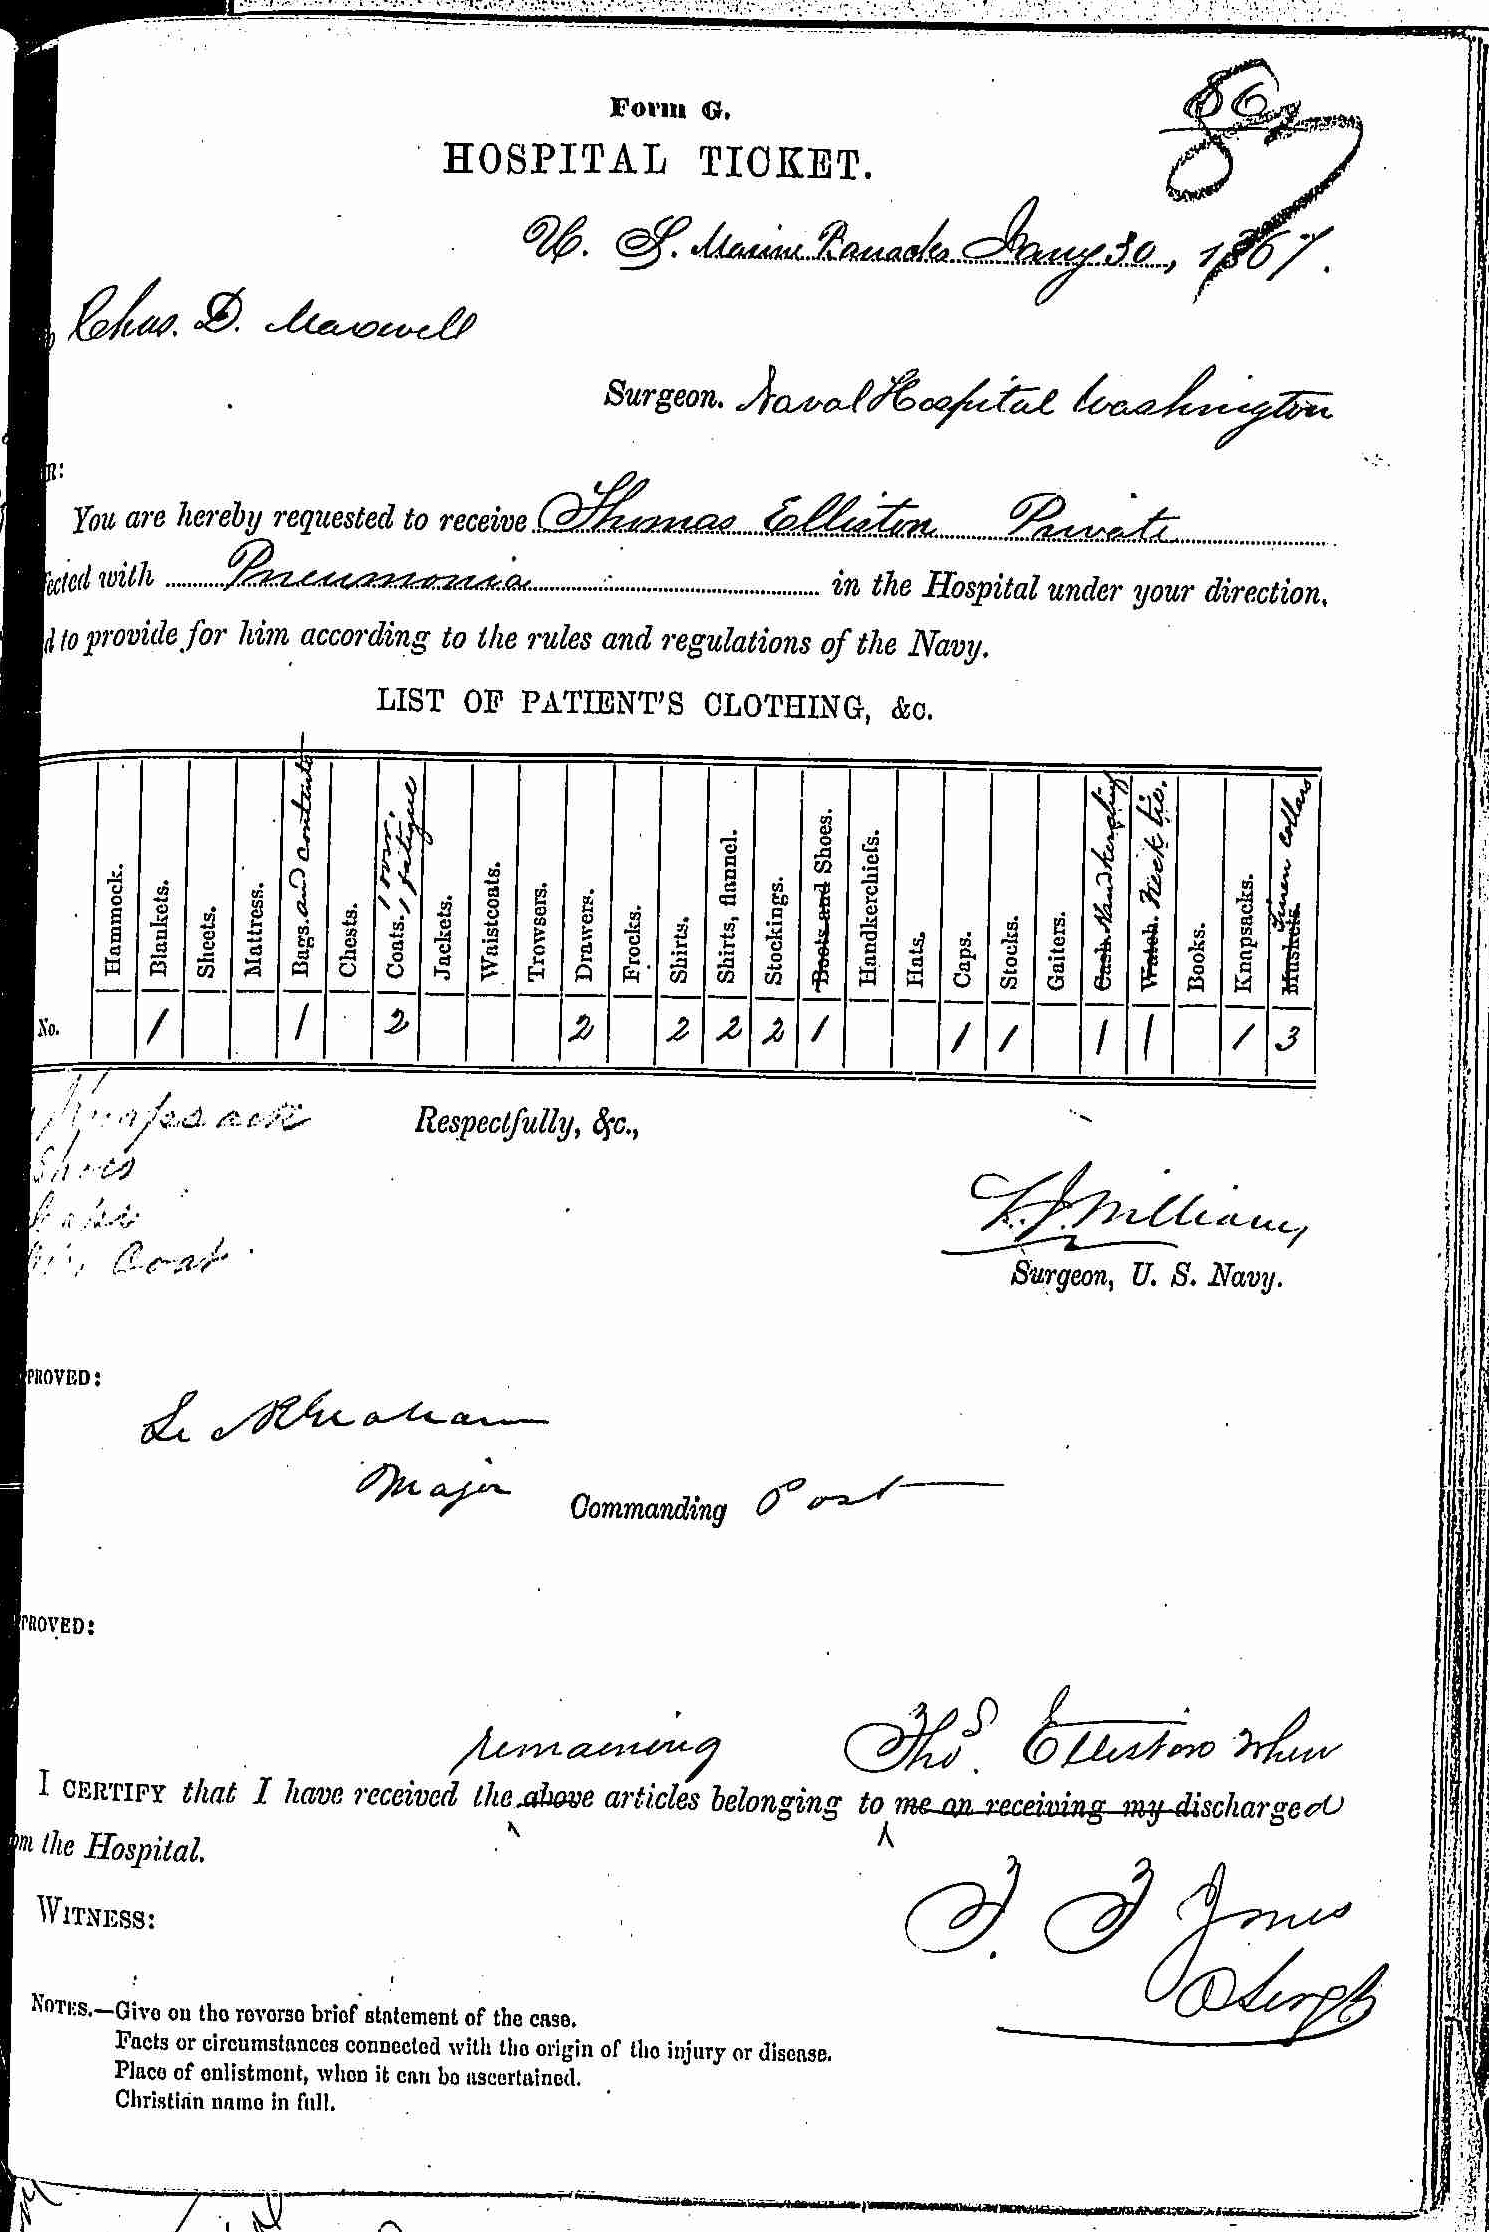 Entry for Thomas Elliston (page 1 of 2) in the log Hospital Tickets and Case Papers - Naval Hospital - Washington, D.C. - 1865-68